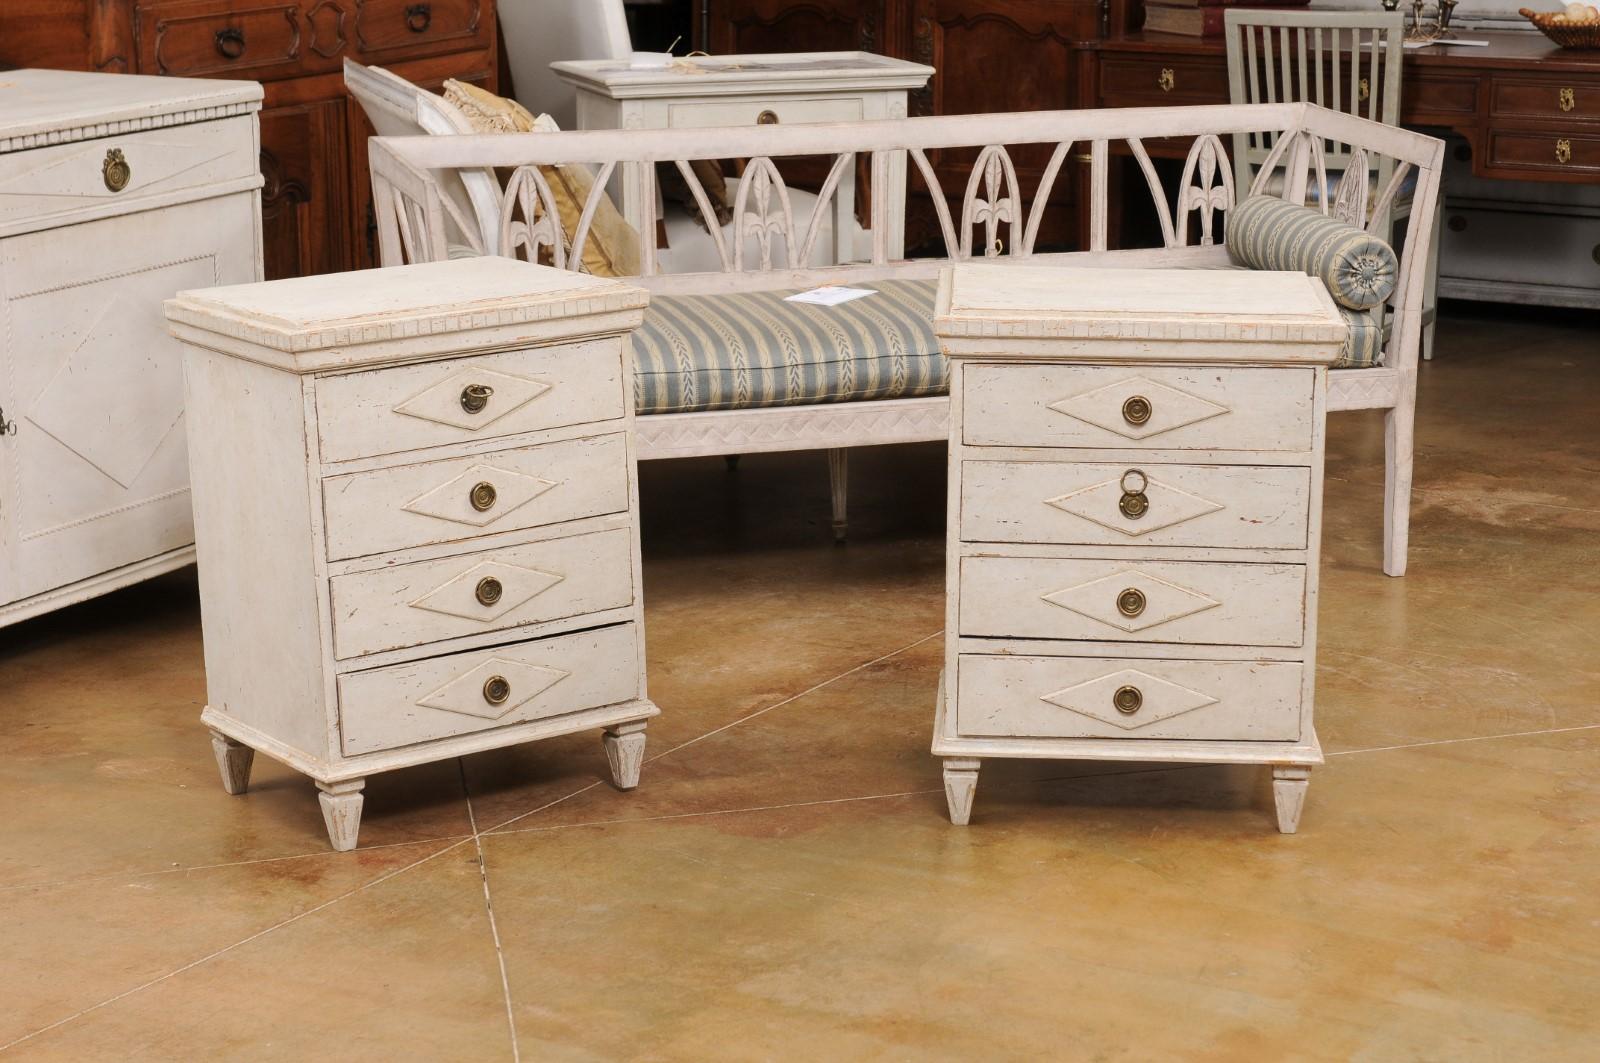 20th Century Pair of Swedish Gustavian Style 1900s Painted Bedside Tables with Four Drawers